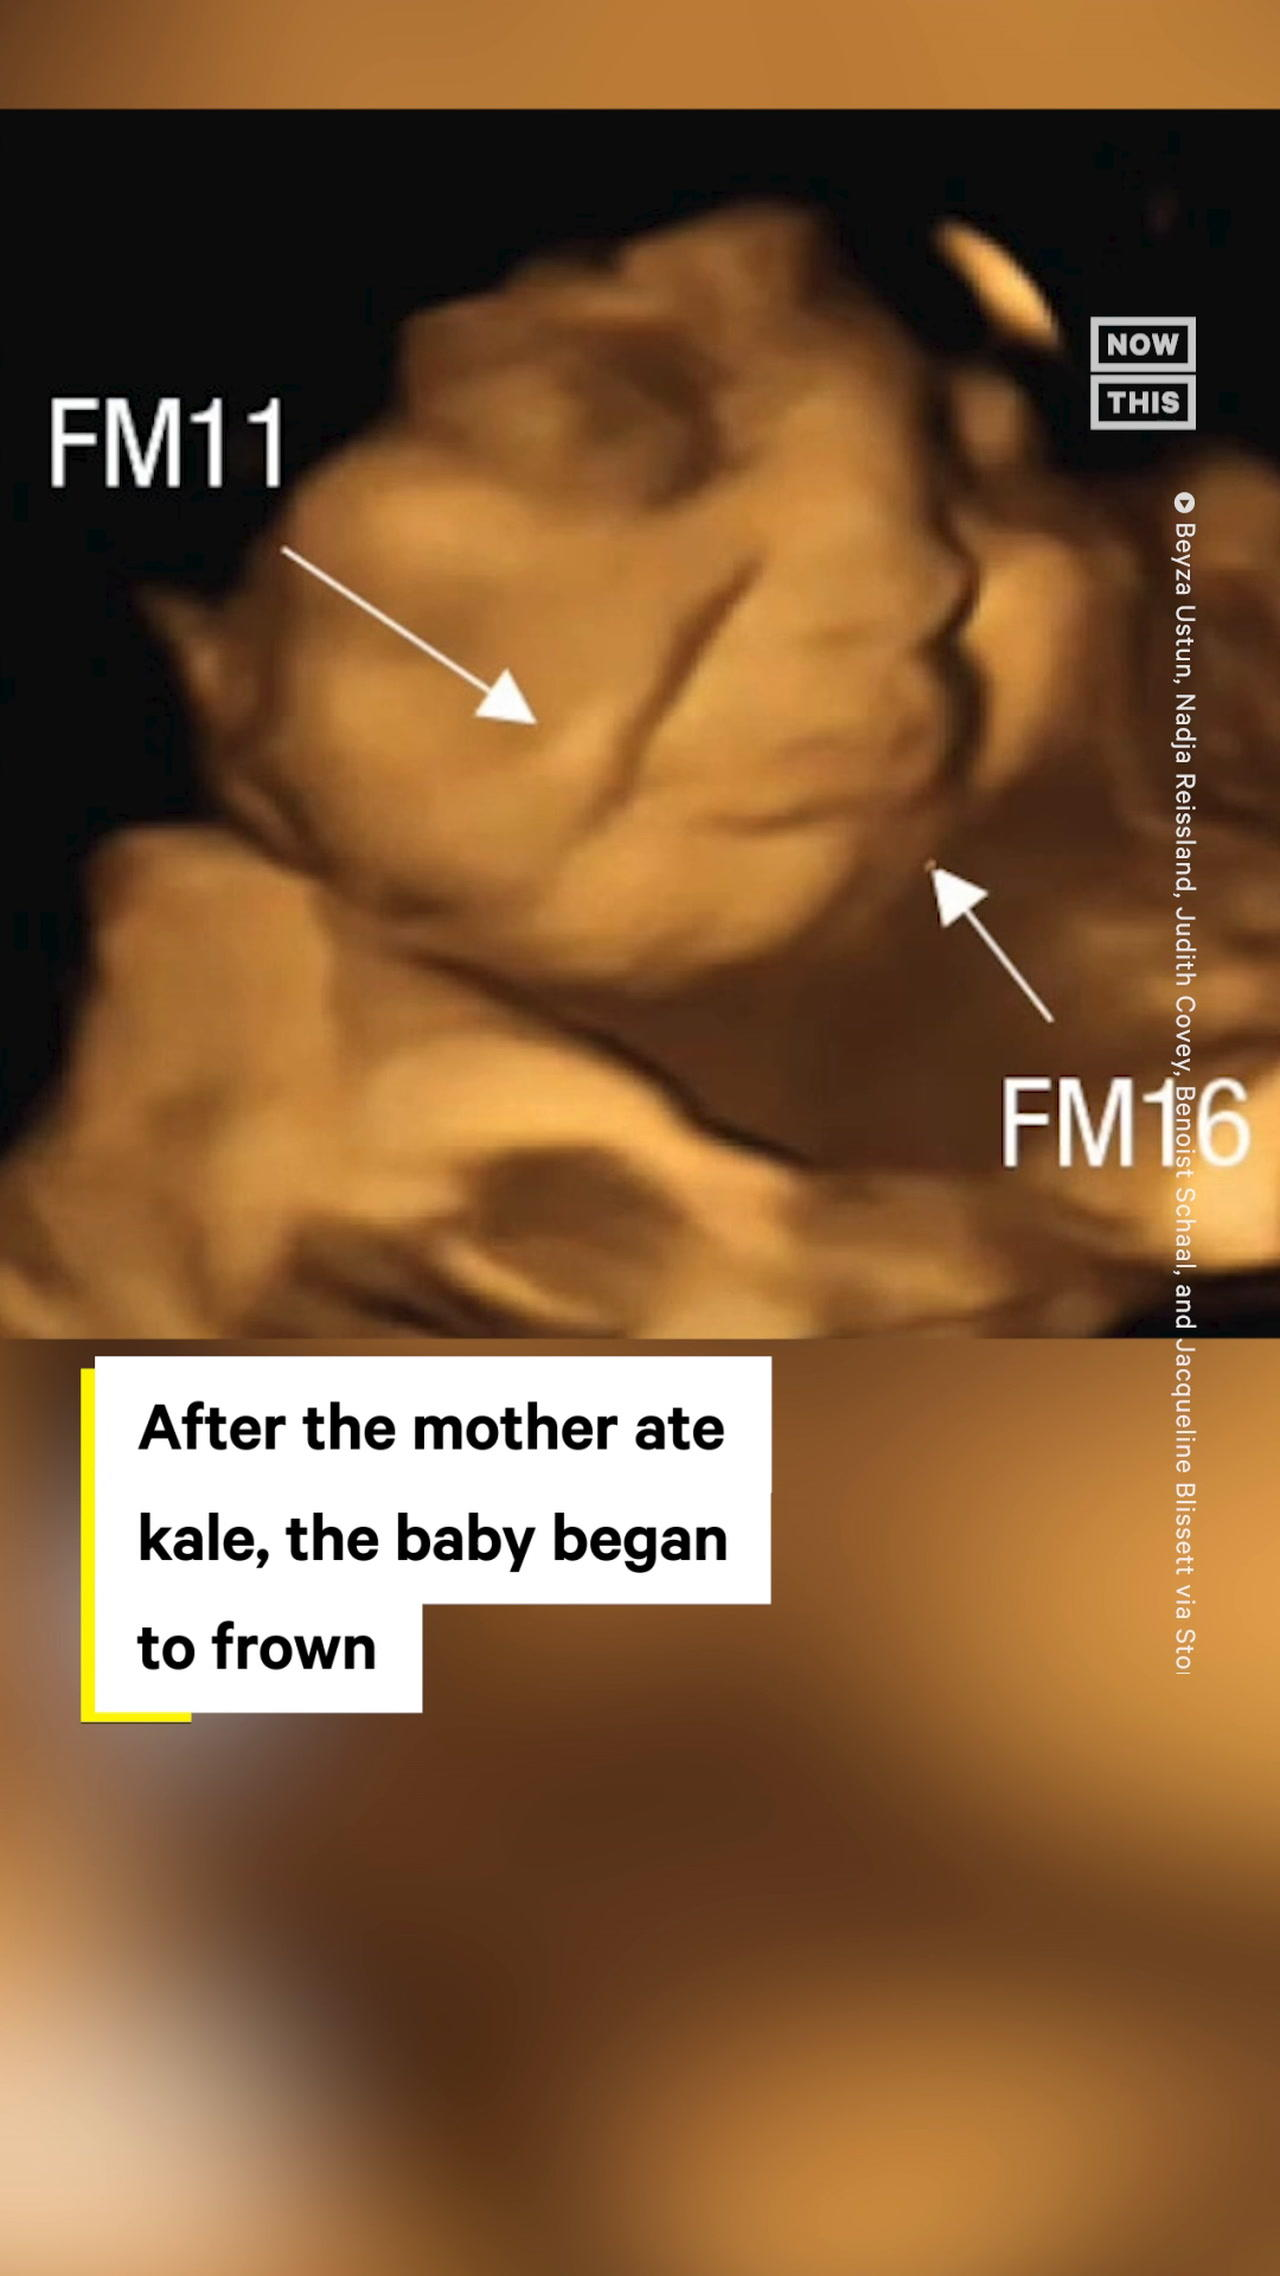 Babies in the Womb React to the Foods Mom Eats, Study Shows